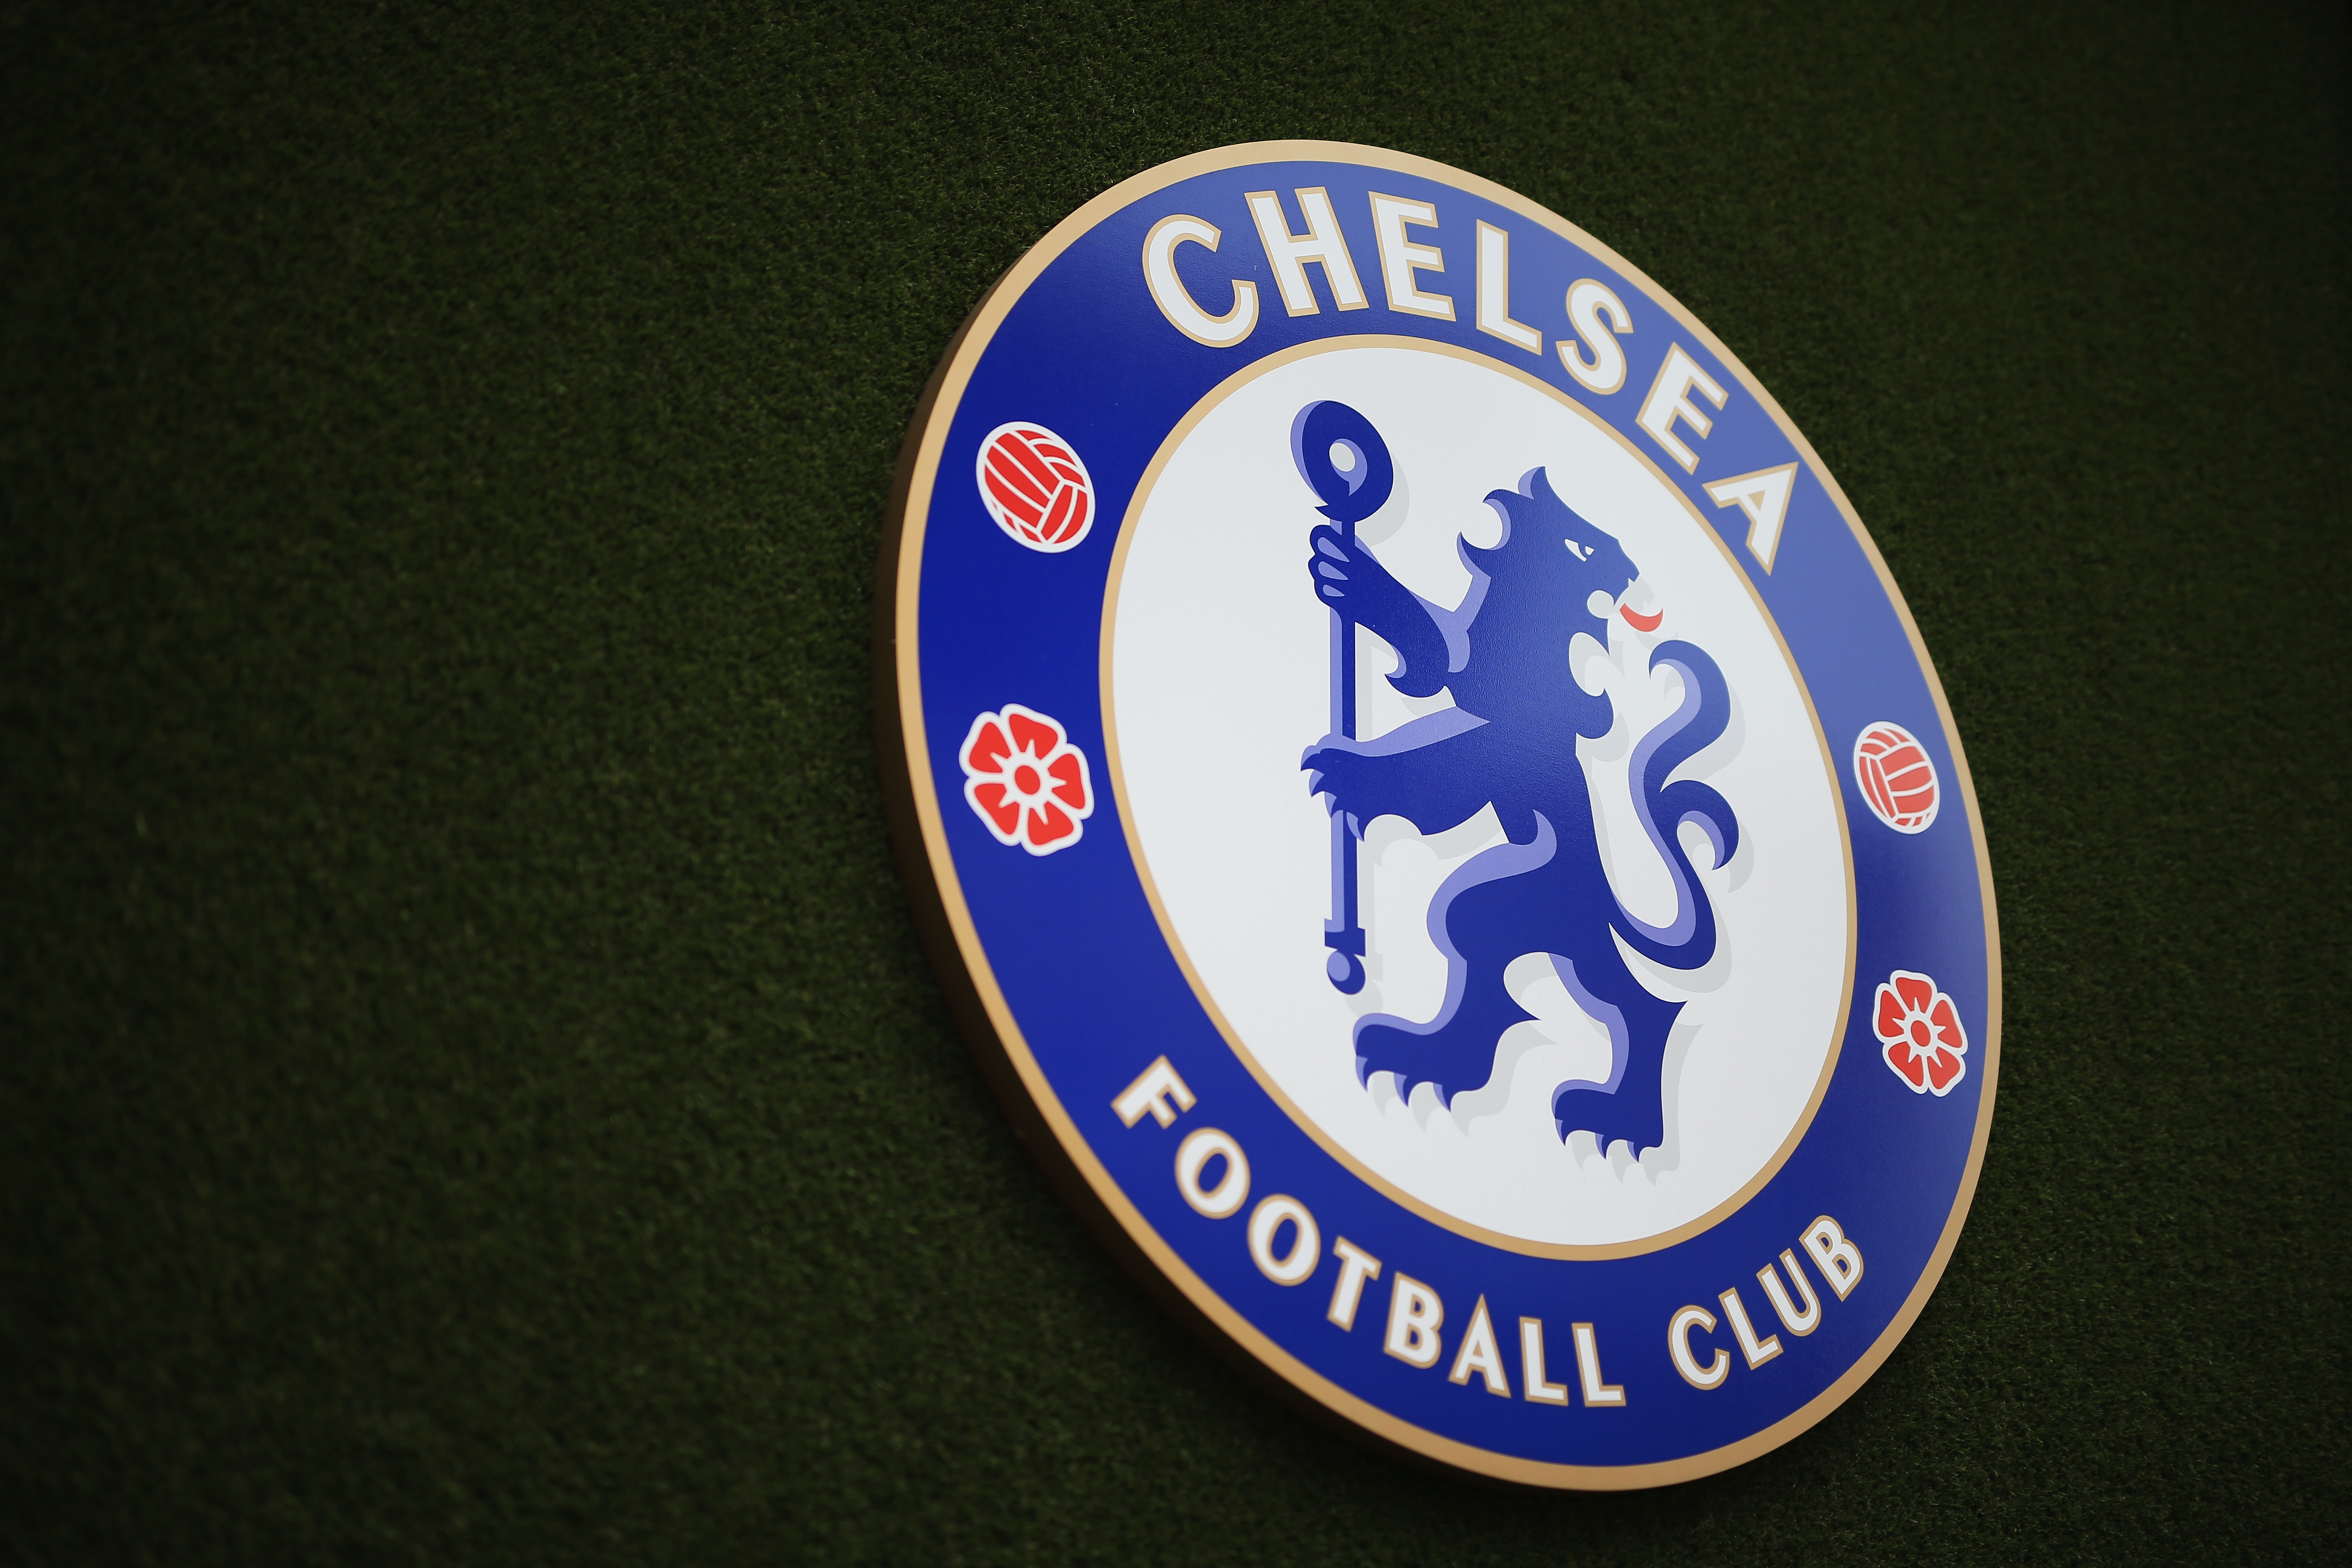 LONDON, ENGLAND - AUGUST 27: The Chelsea logo during the Premier League match between Chelsea and Burnley at Stamford Bridge on August 27, 2016 in London, England.  (Photo by Ben Hoskins/Getty Images)